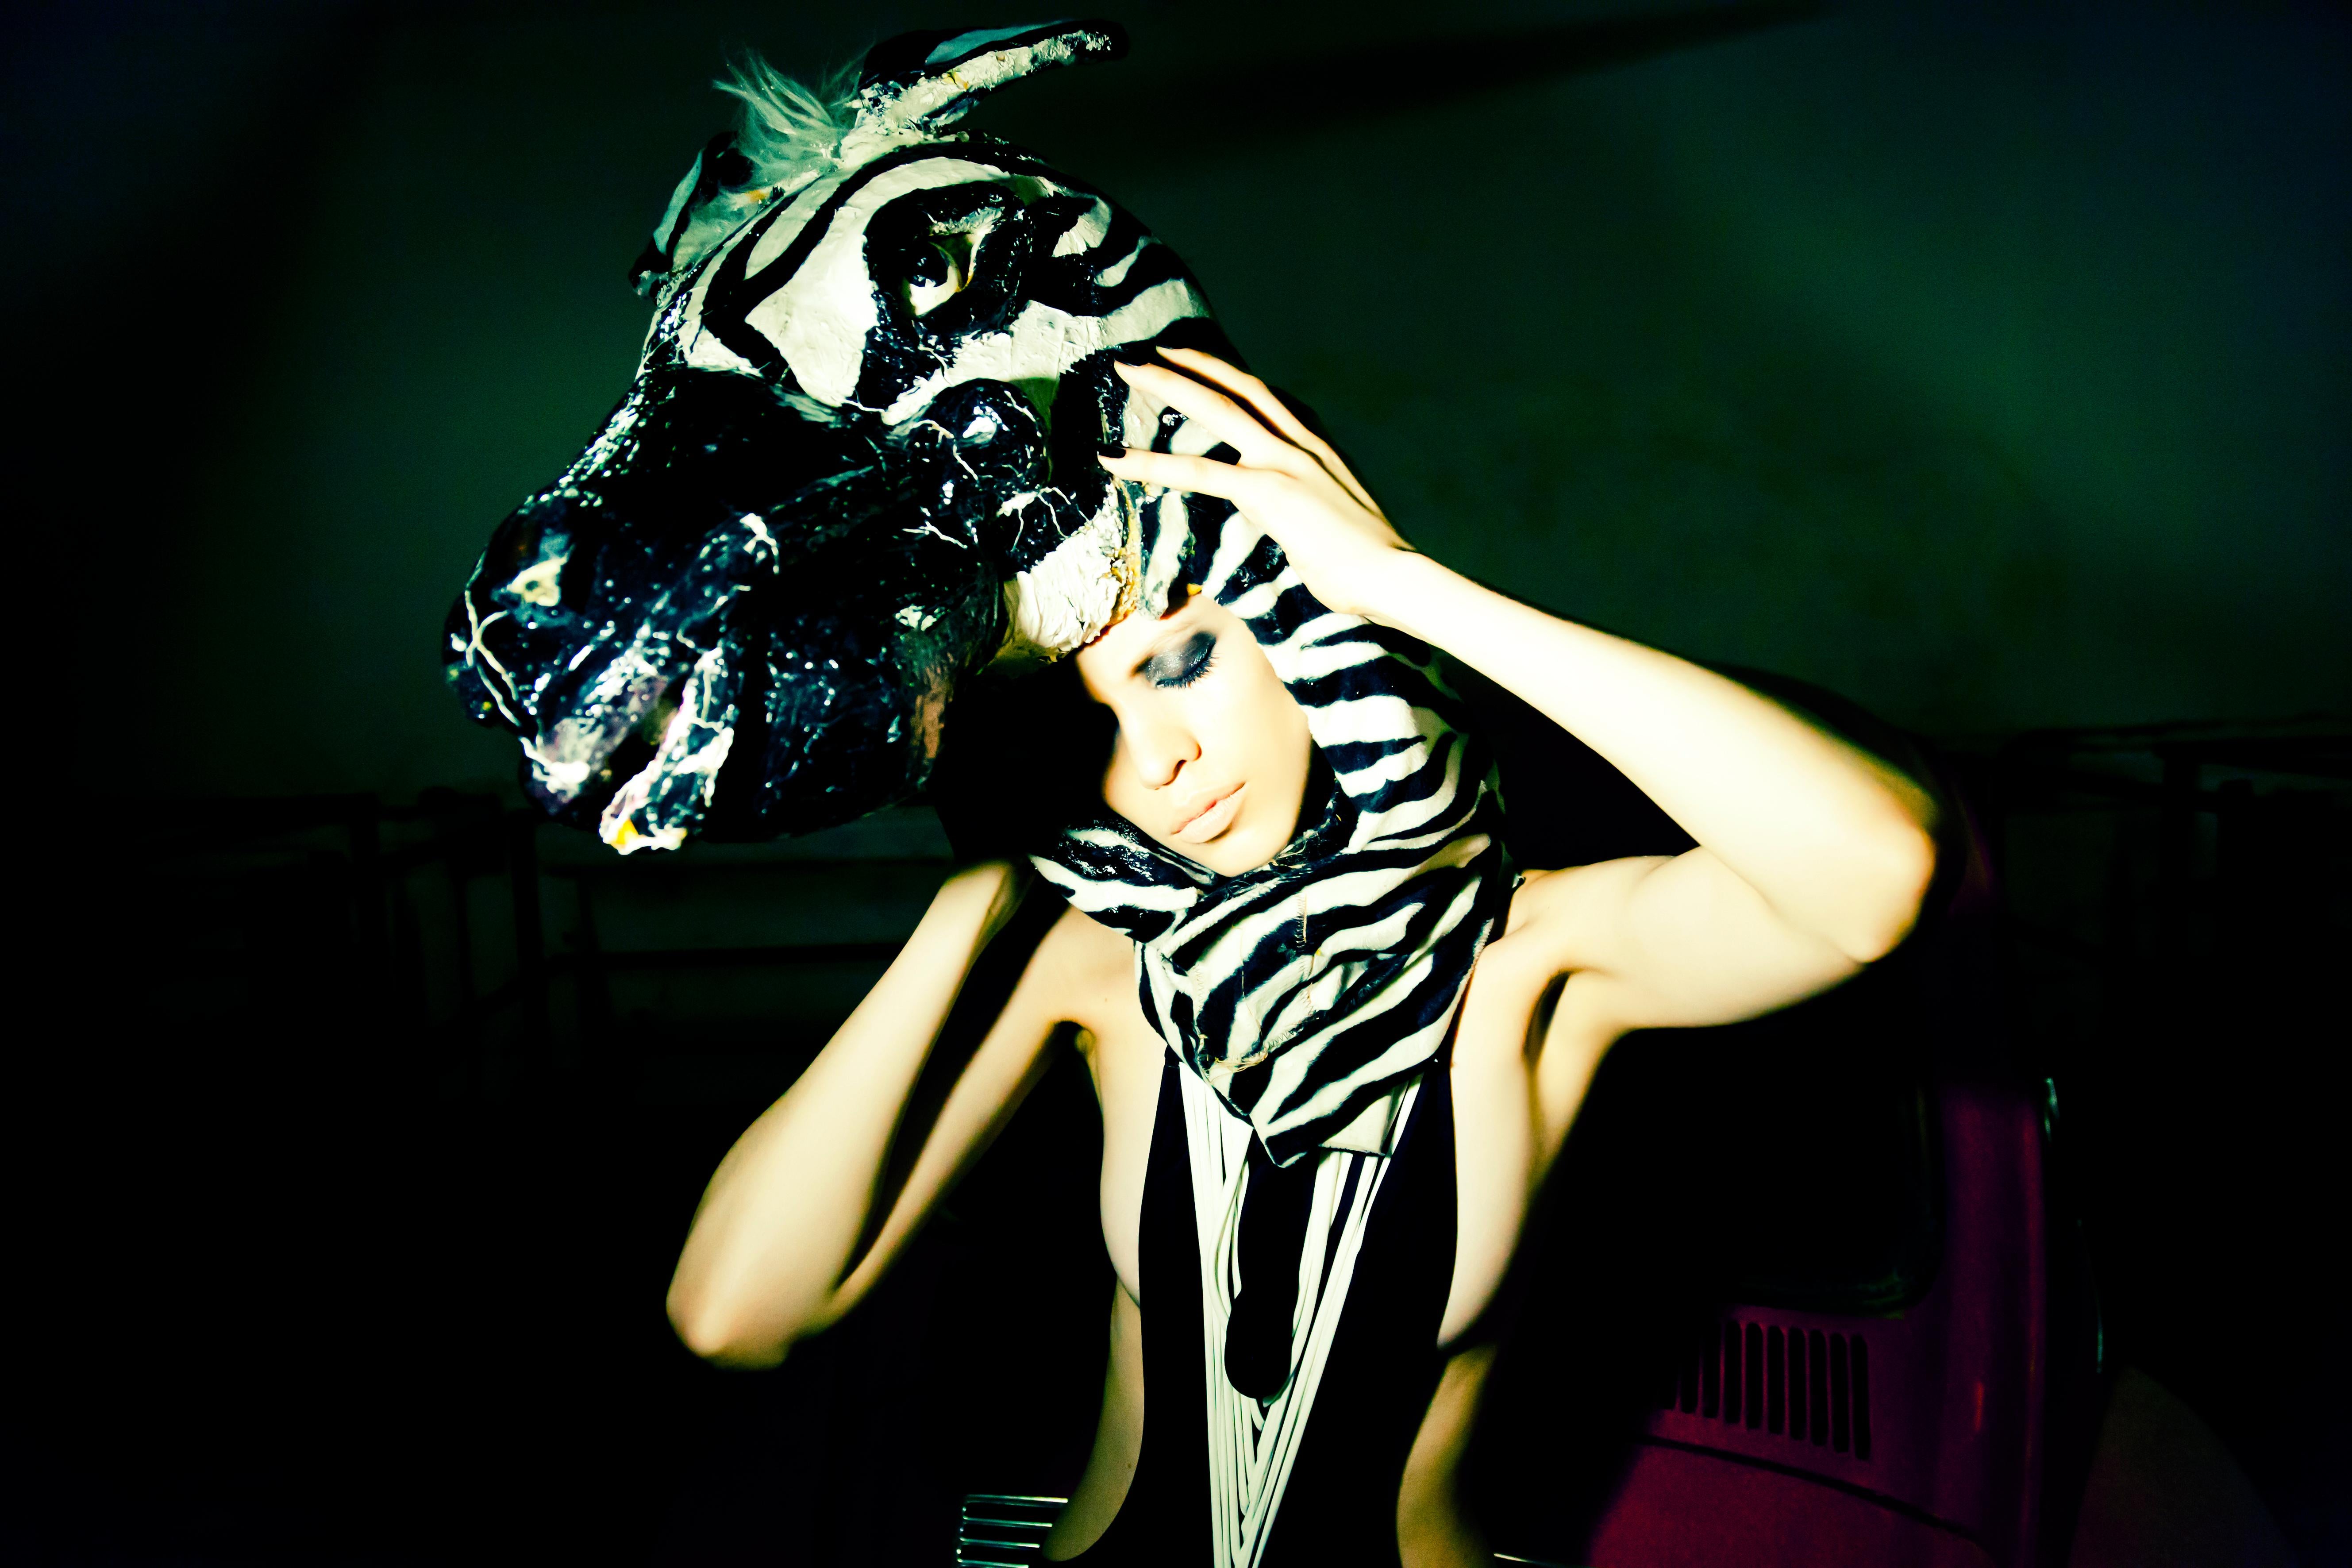 Zebra Head by top photographer; Lior Nordman.
21st century fine art modern photography portrait Acrylic & Dibond 
Museum quality pigment print in XL size (59x79 Inch), limited editions 7.
Fine-Art Pigment Print on the highest quality paper (tested